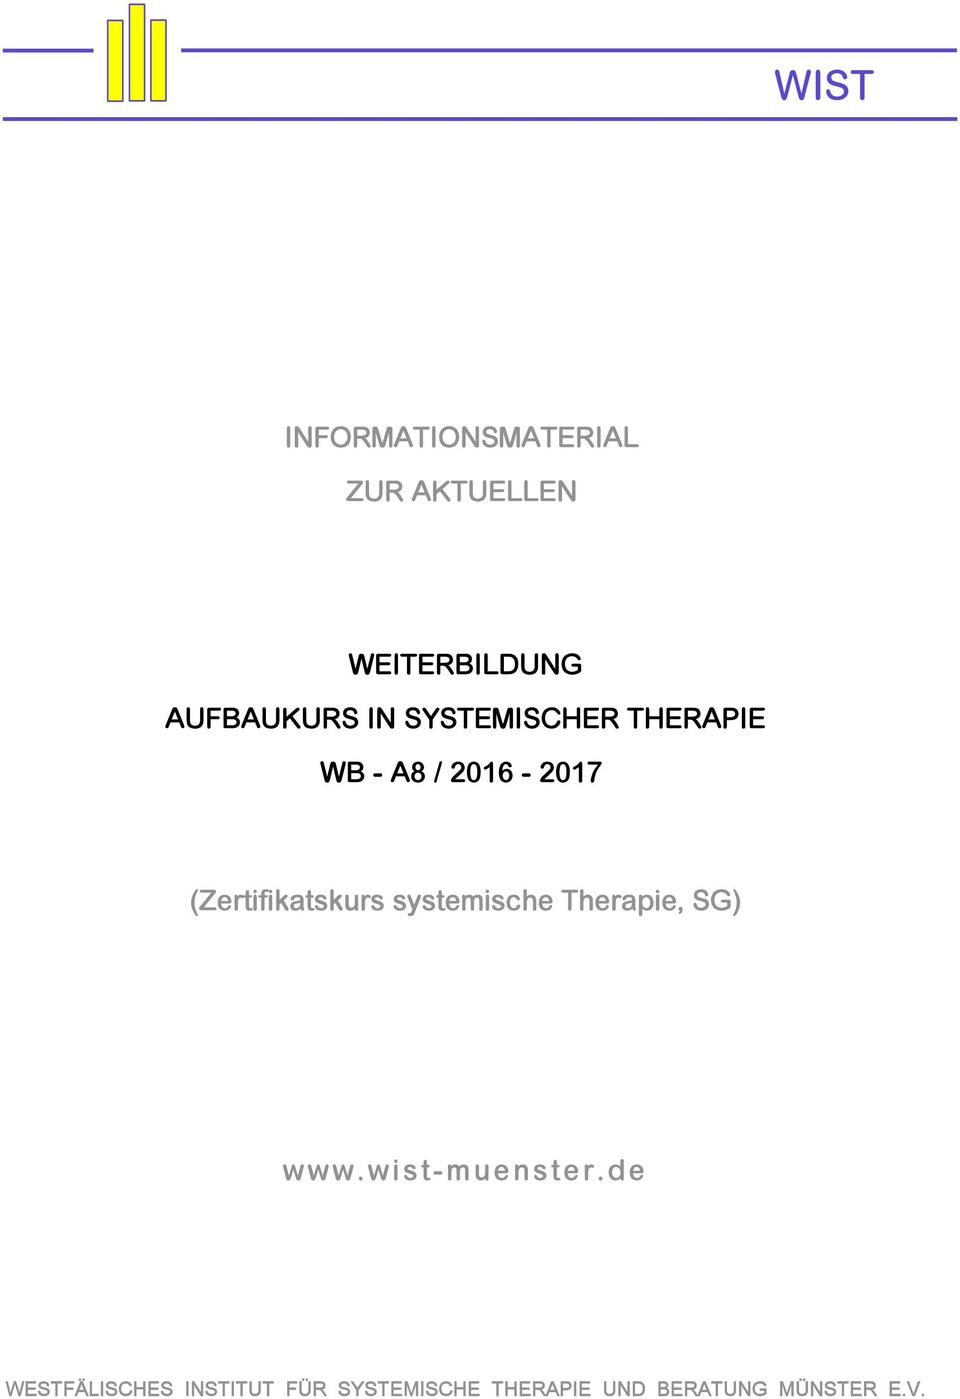 THERAPIE WB - A8 / 2016-2017